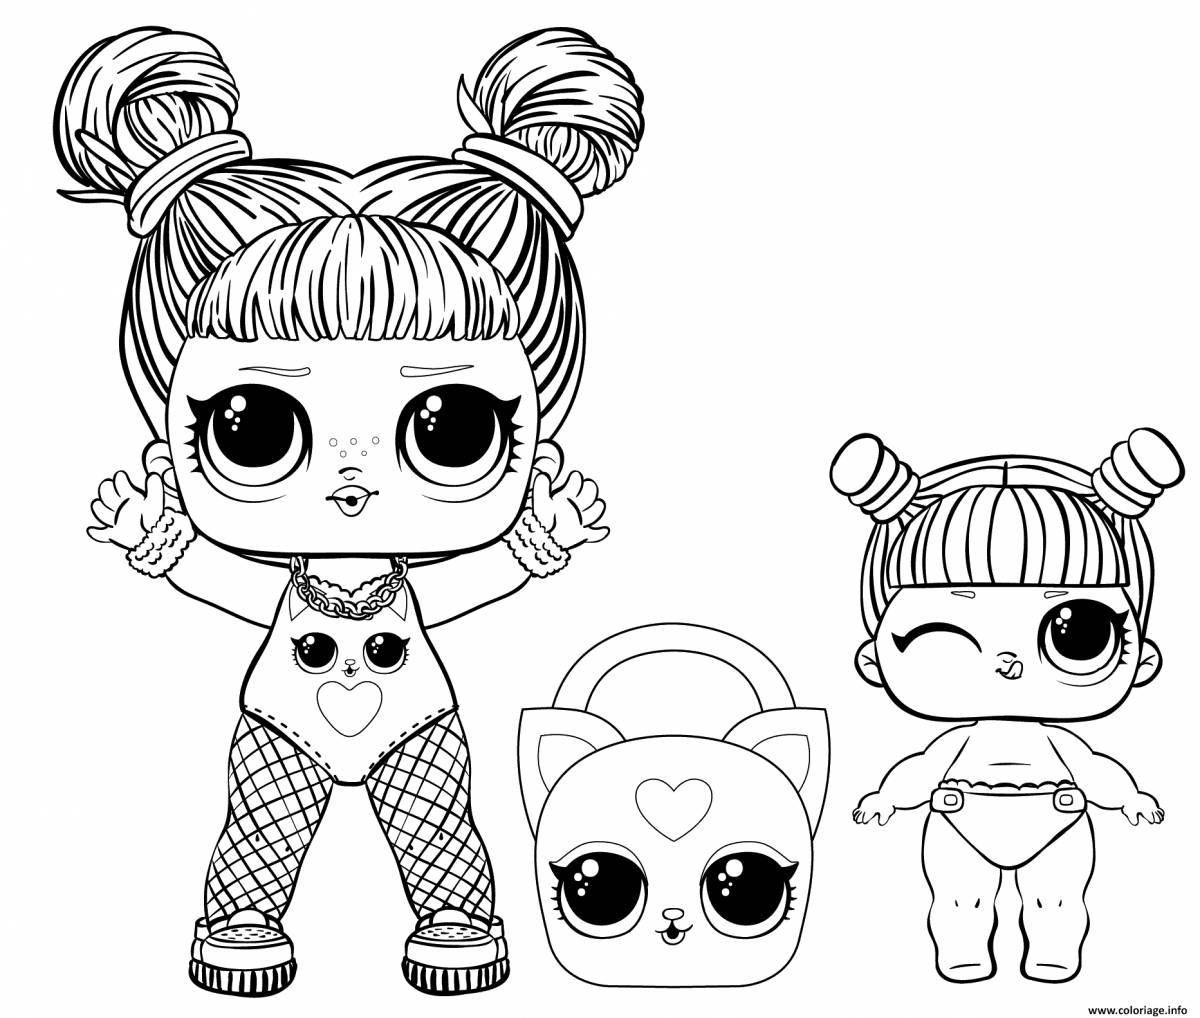 Playful coloring of lol dolls and their pets